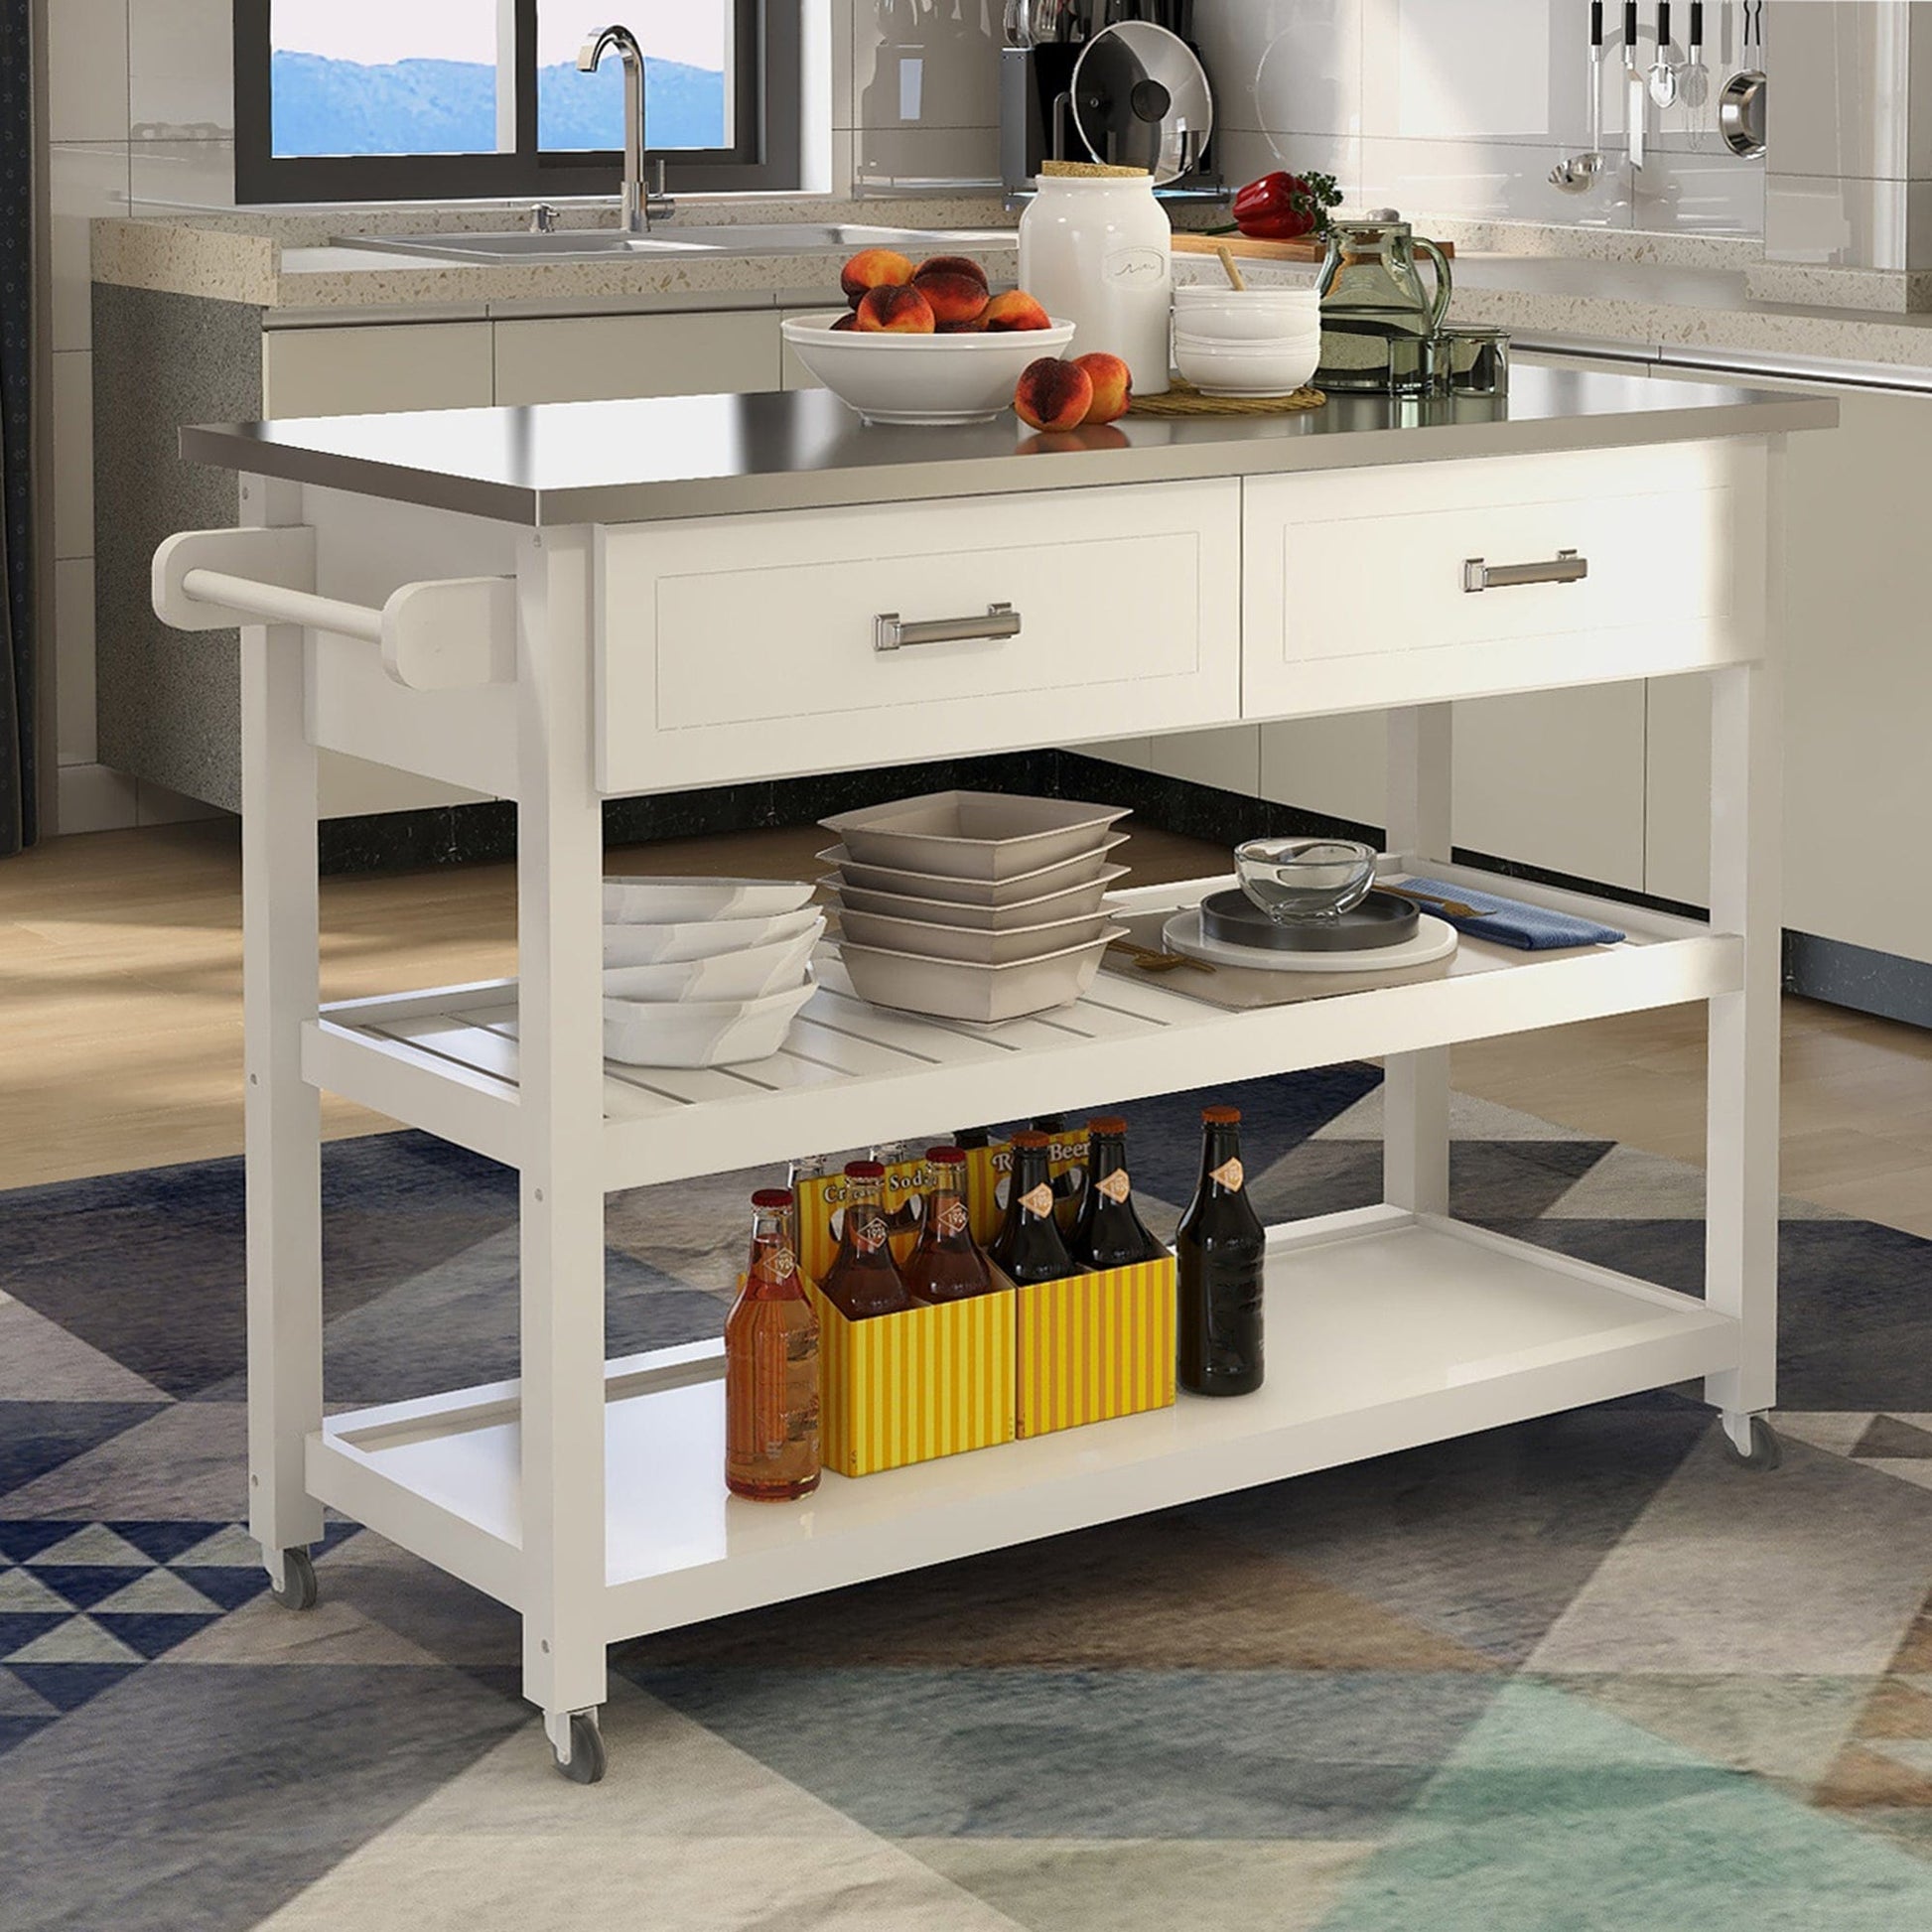 1st Choice Furniture Direct 1st Choice Stylish Organization Stainless Steel Table Top White Kitchen Cart